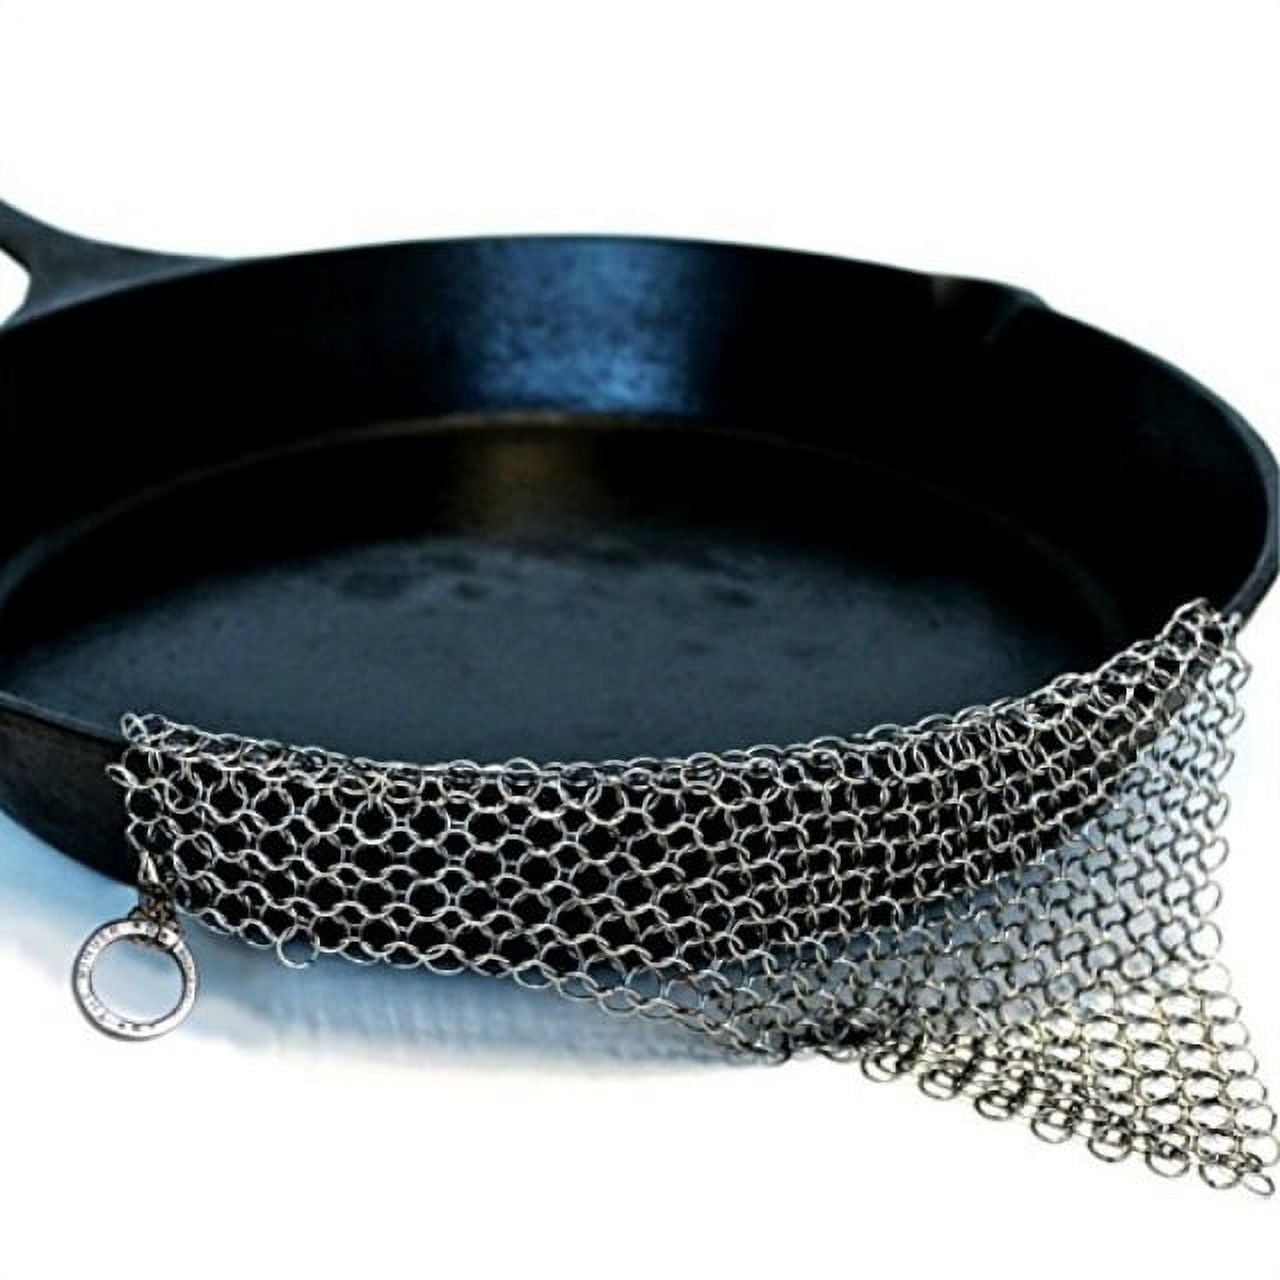 Cast Iron Scrubber 316 Stainless Steel Cast Iron Skillet Cleaner 8x6  Chainmail Scrubber Scraper Chain Mail Link Scrub for Cast Iron Pre-Seasoned